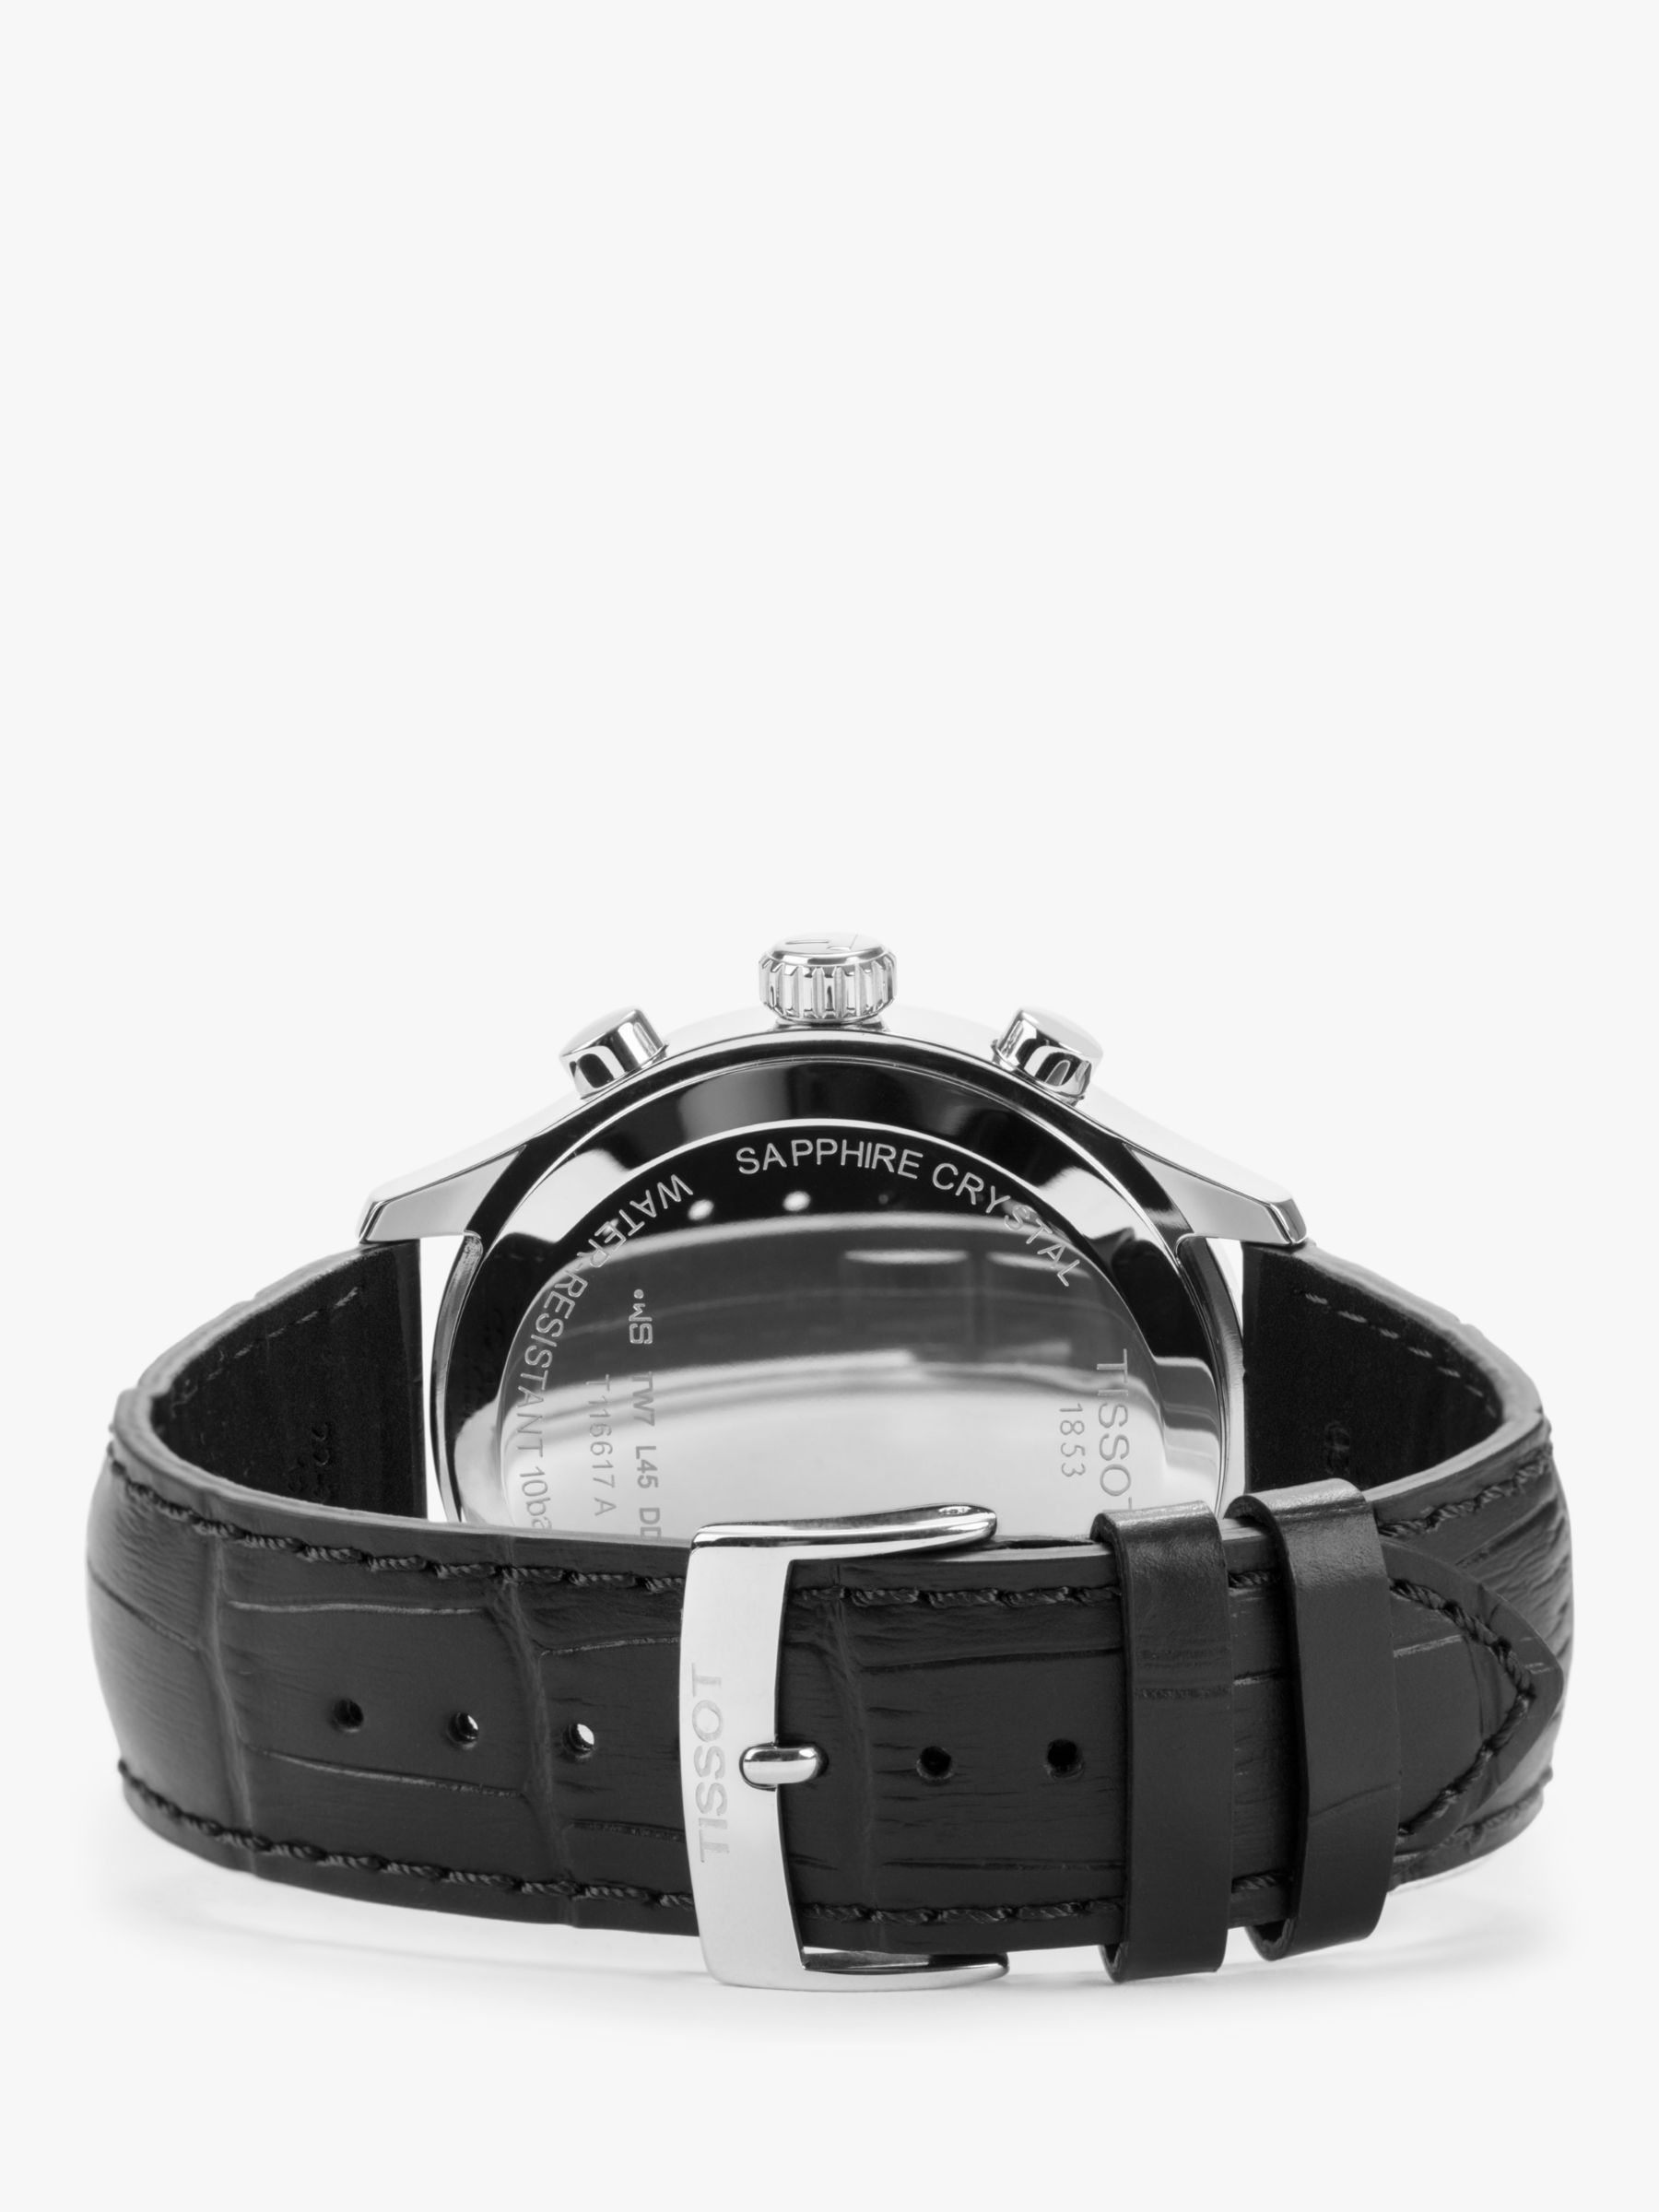 Buy Tissot T1166171605700 Men's Classic Chronograph Date Leather Strap Watch, Black Online at johnlewis.com